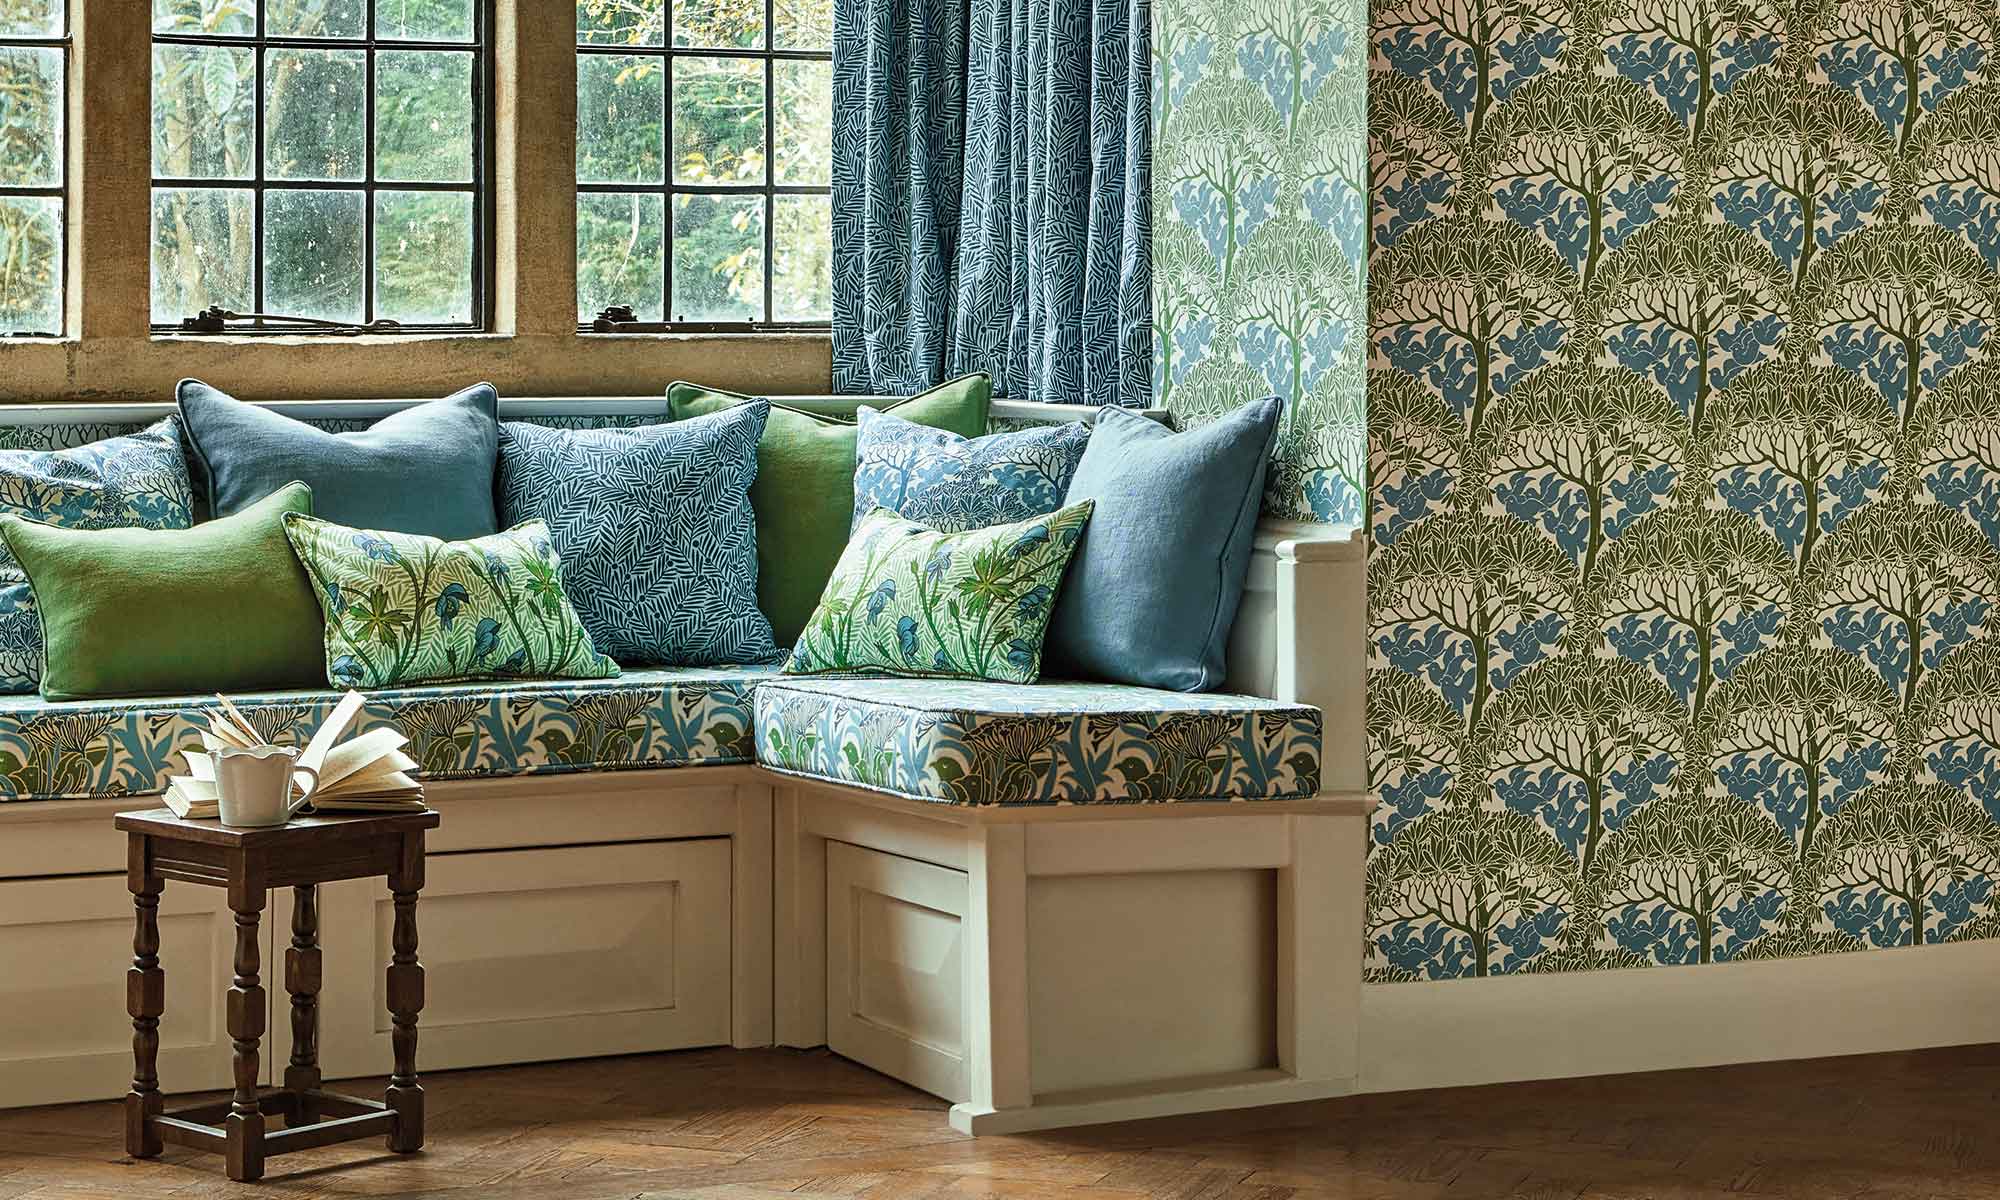 Morris & Co Bedford Park Wallpaper & Fabric Collection | Alcove sitting area with wallpaper featuring green & blue foral print